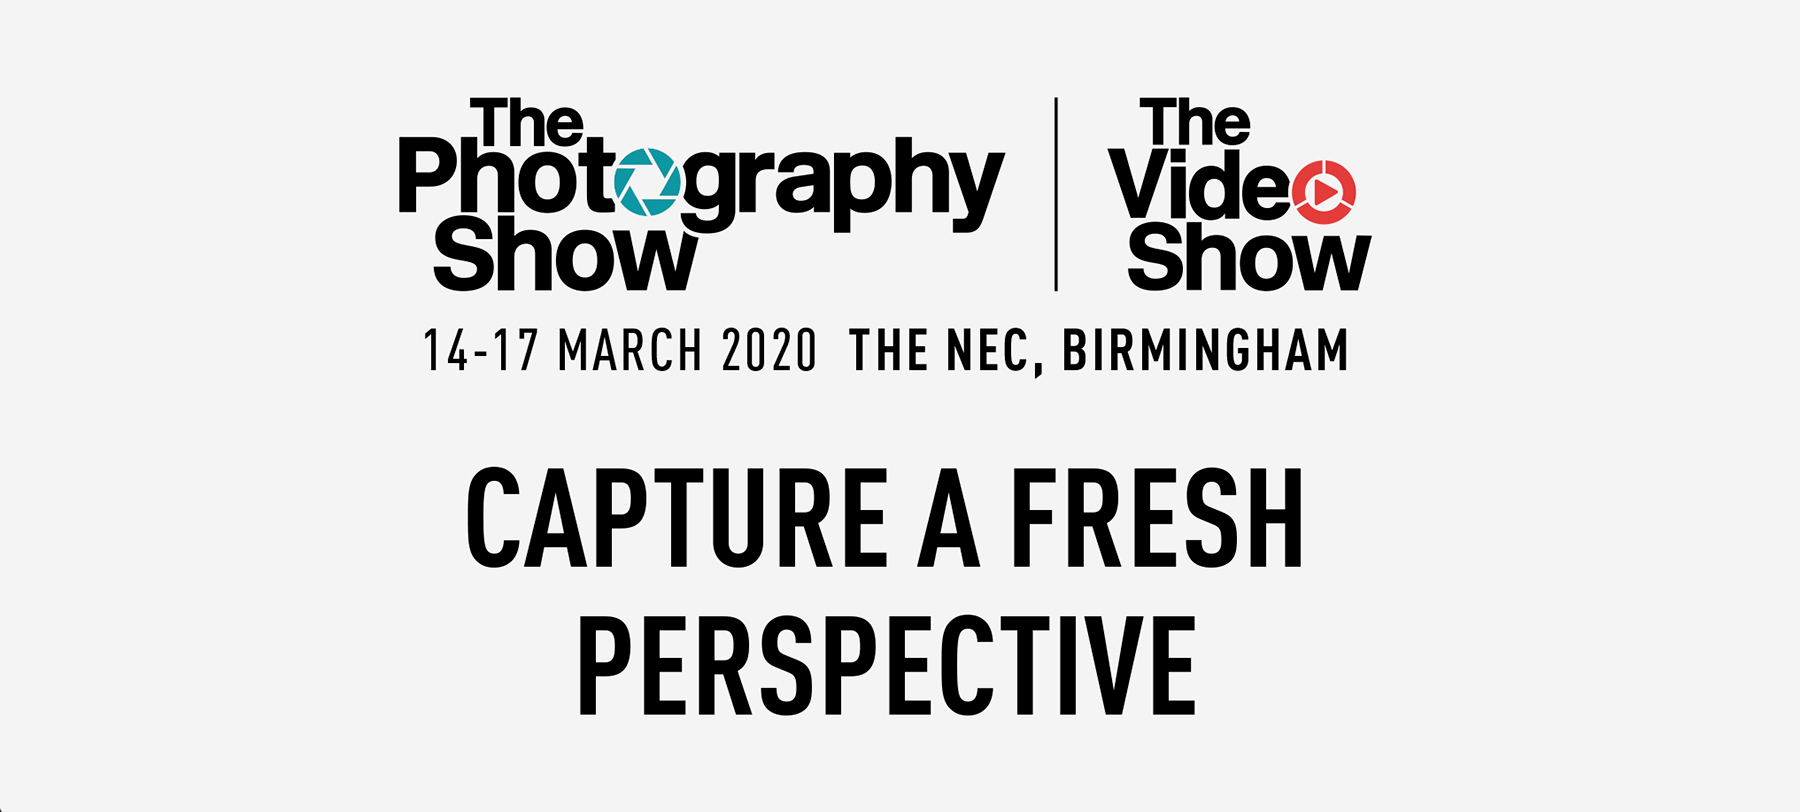 The Photography Show 2020